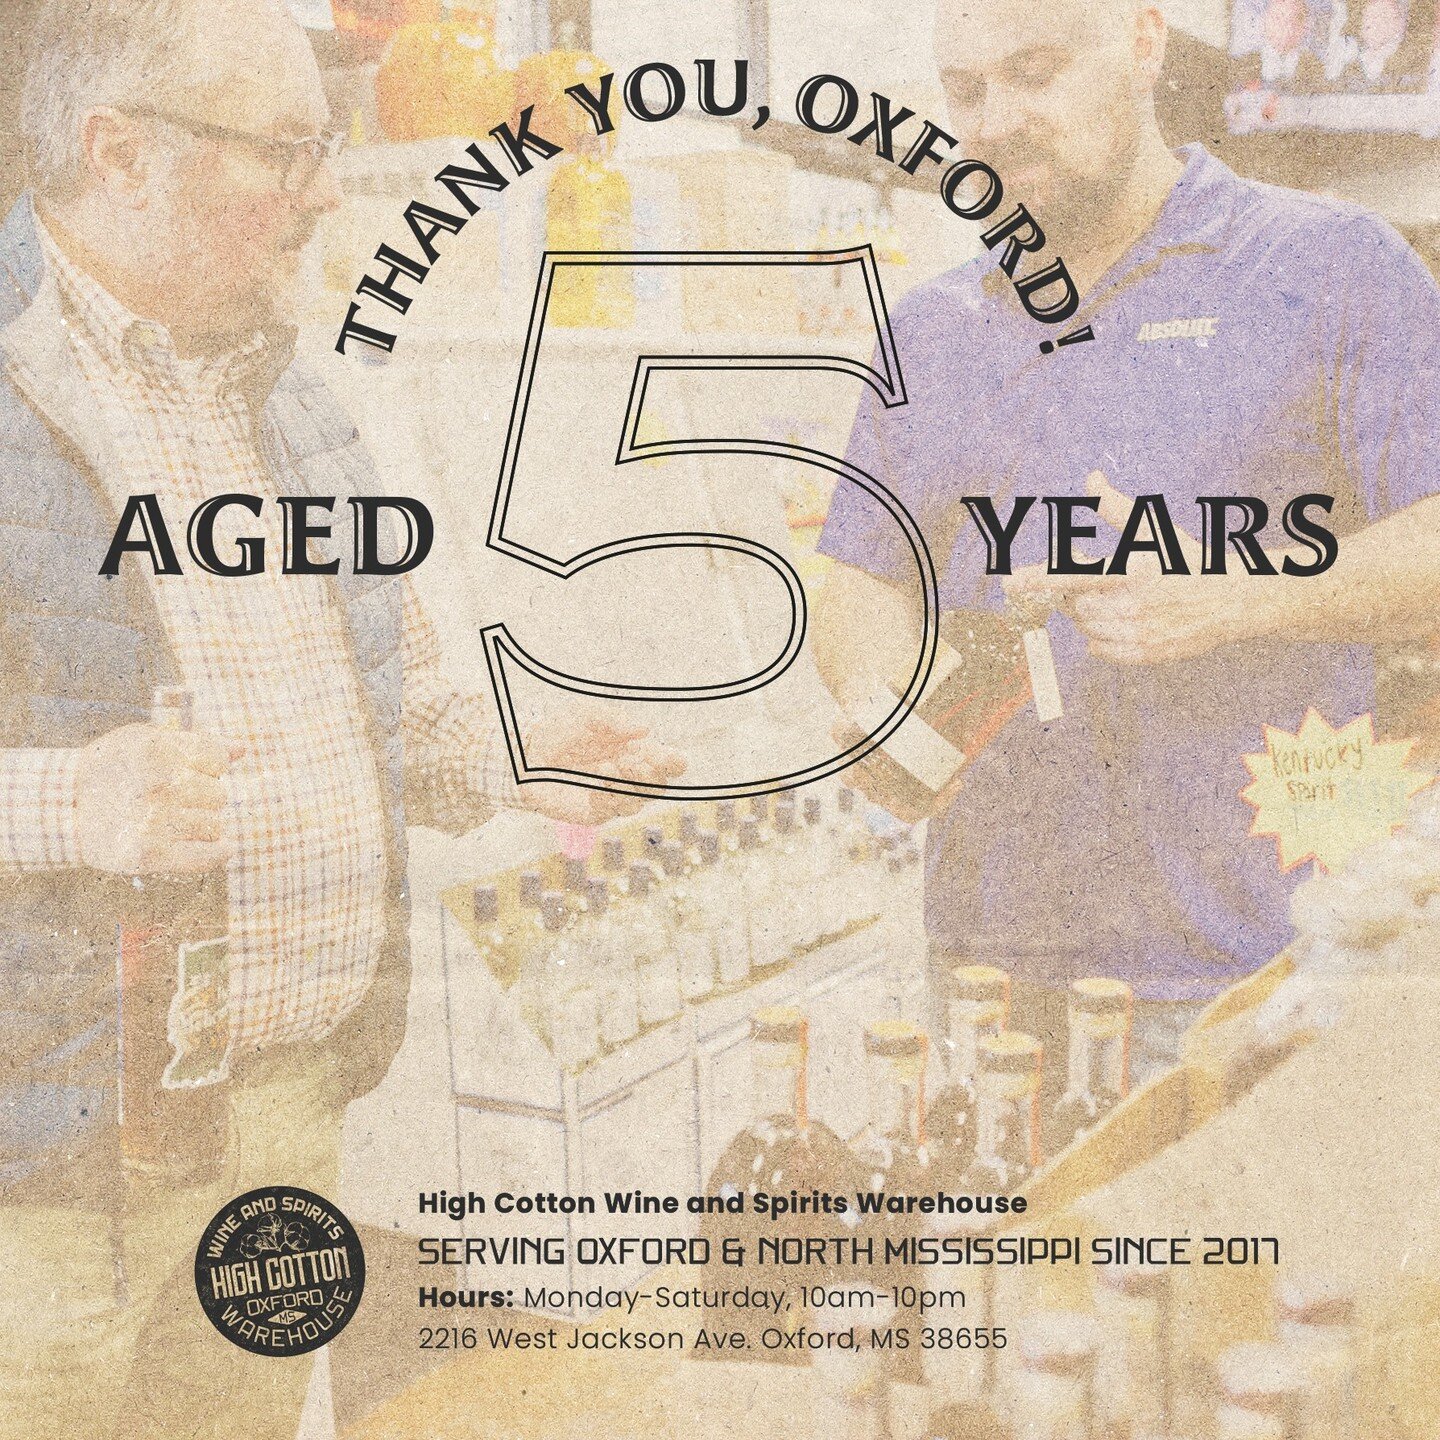 This week, High Cotton Warehouse is celebrating its five year anniversary! Thank you to the city of Oxford and all of our wonderful customers for supporting our business.

�If you happen to stop by the store today, you will find special promotions on